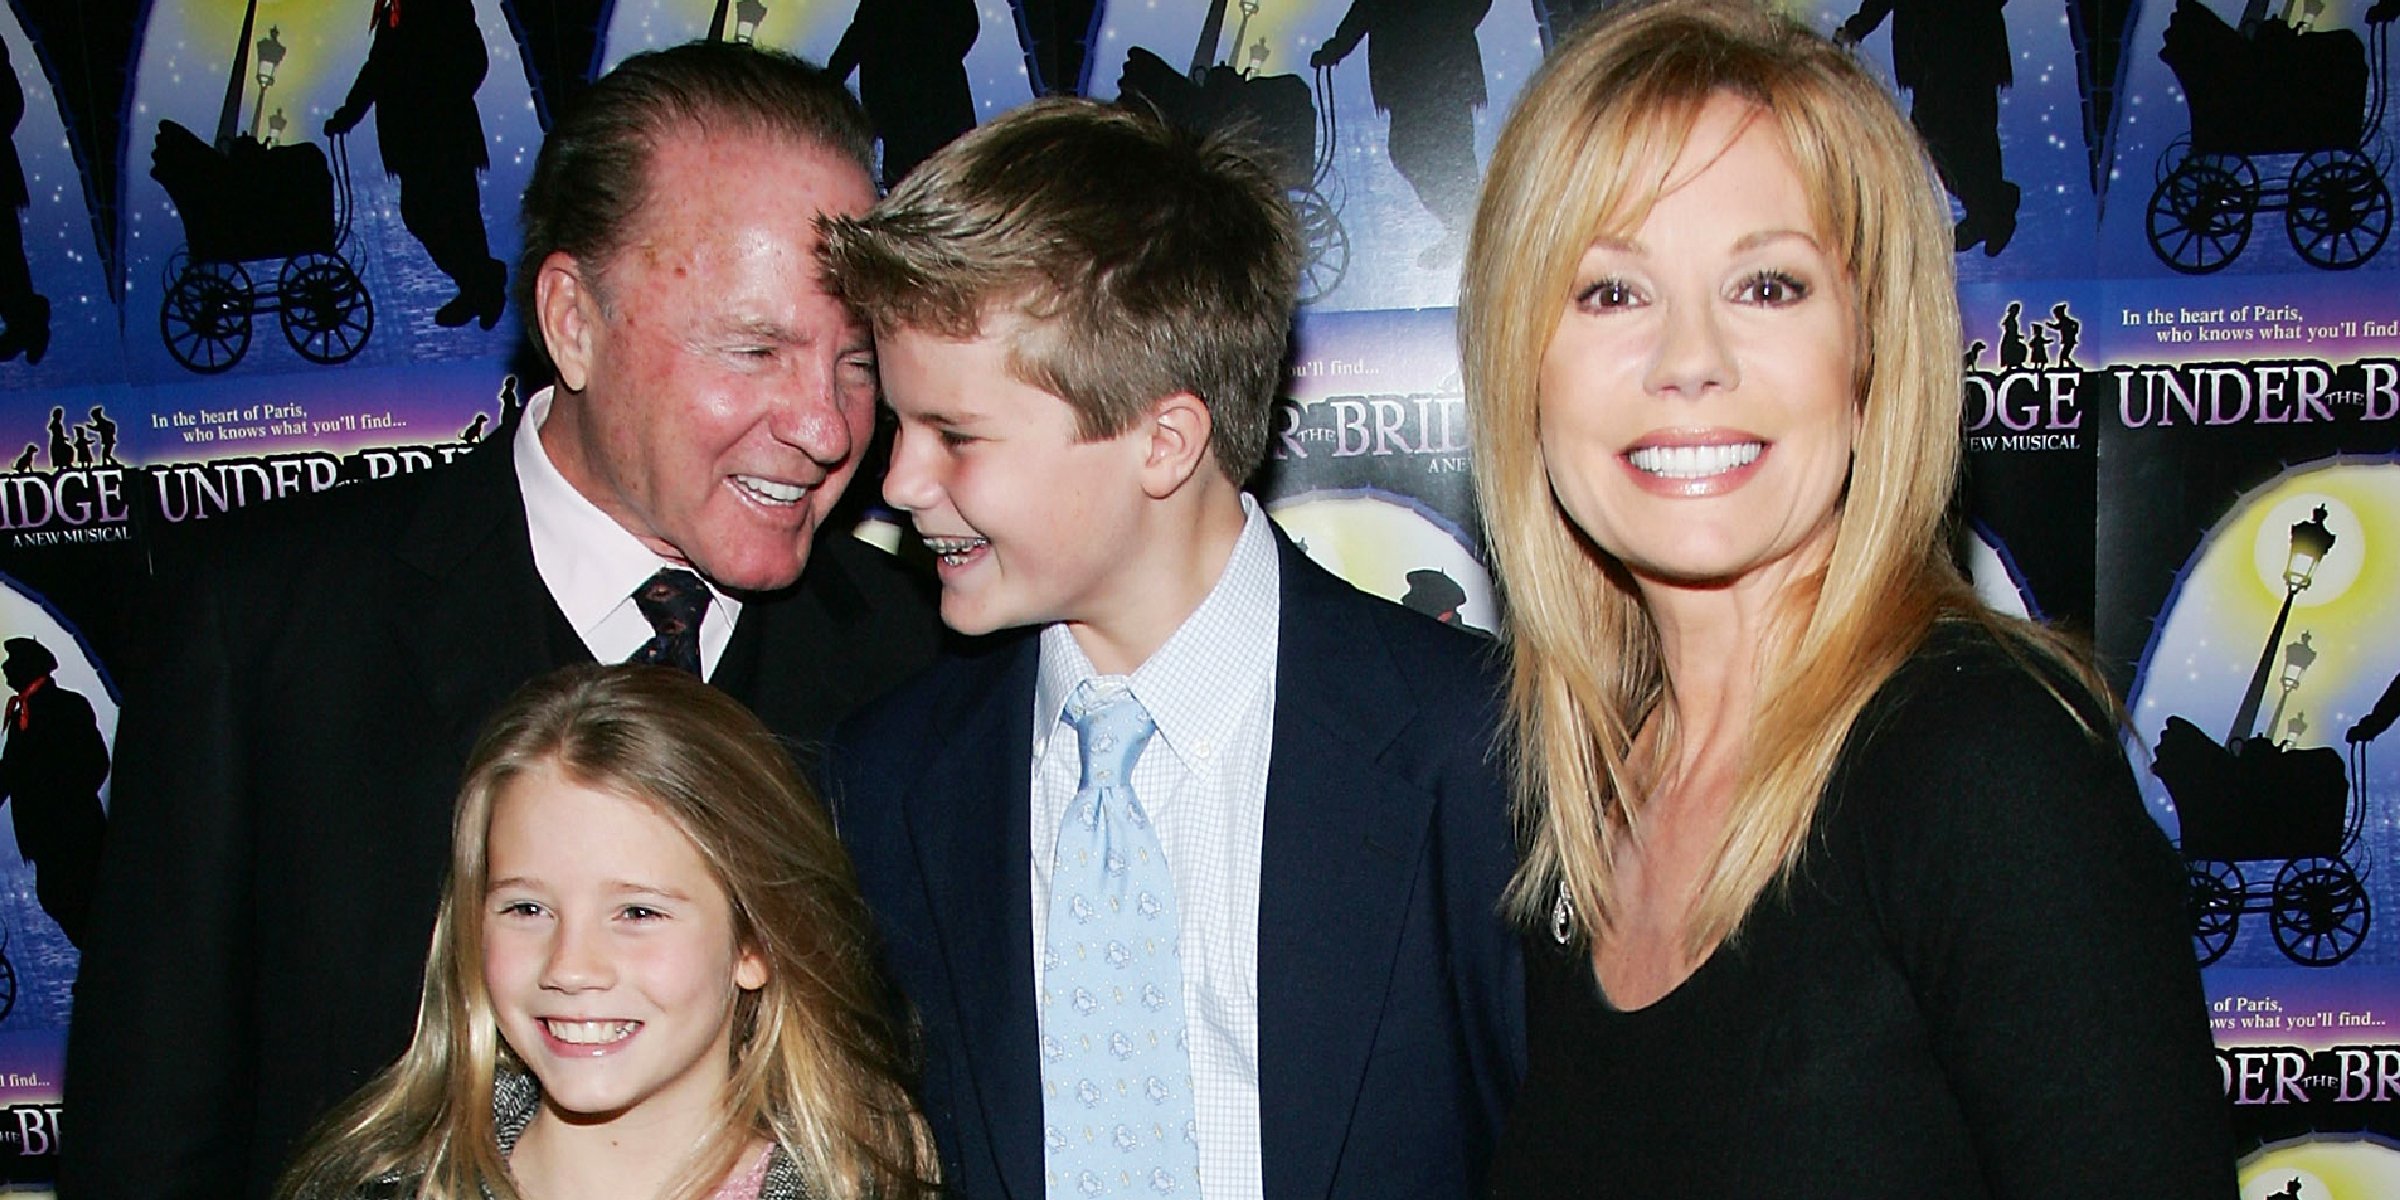 Frank Gifford, Cody Gifford, Cassidy Gifford, and Kathie Gifford | Source: Getty Images